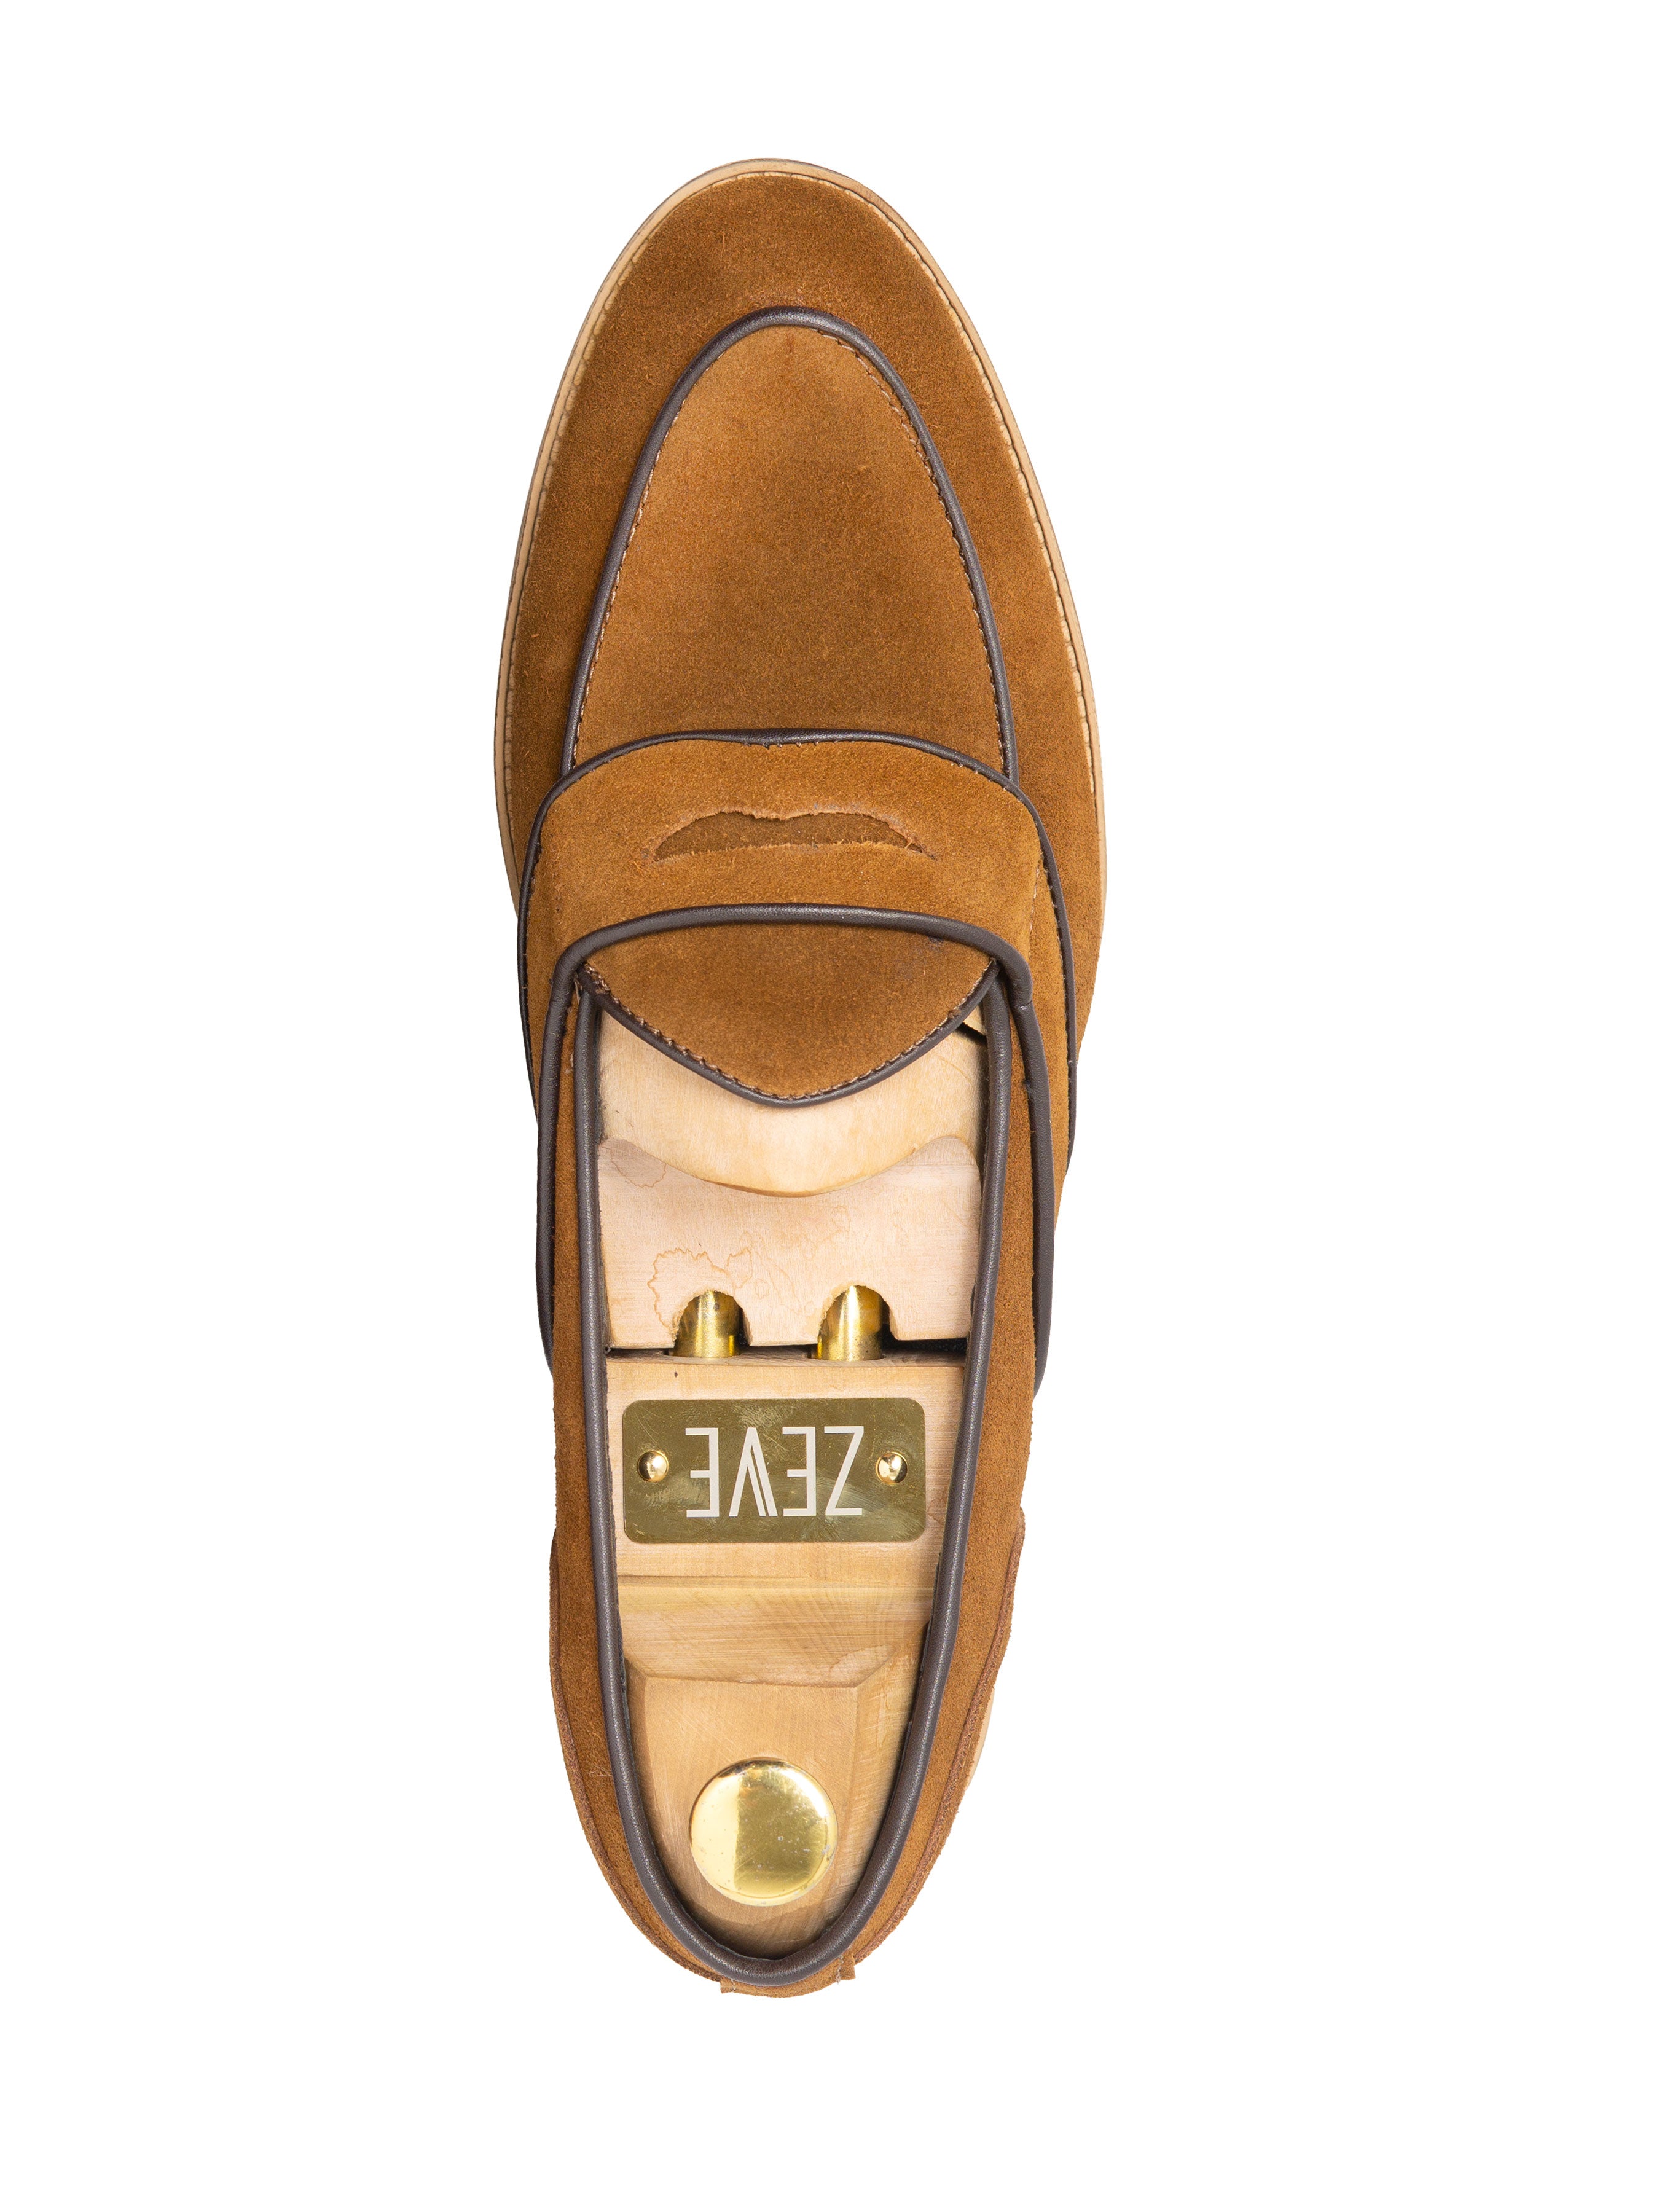 Belgian Loafer - Camel Suede Leather With Penny Strap Piping (Flexi-Sole) - Zeve Shoes